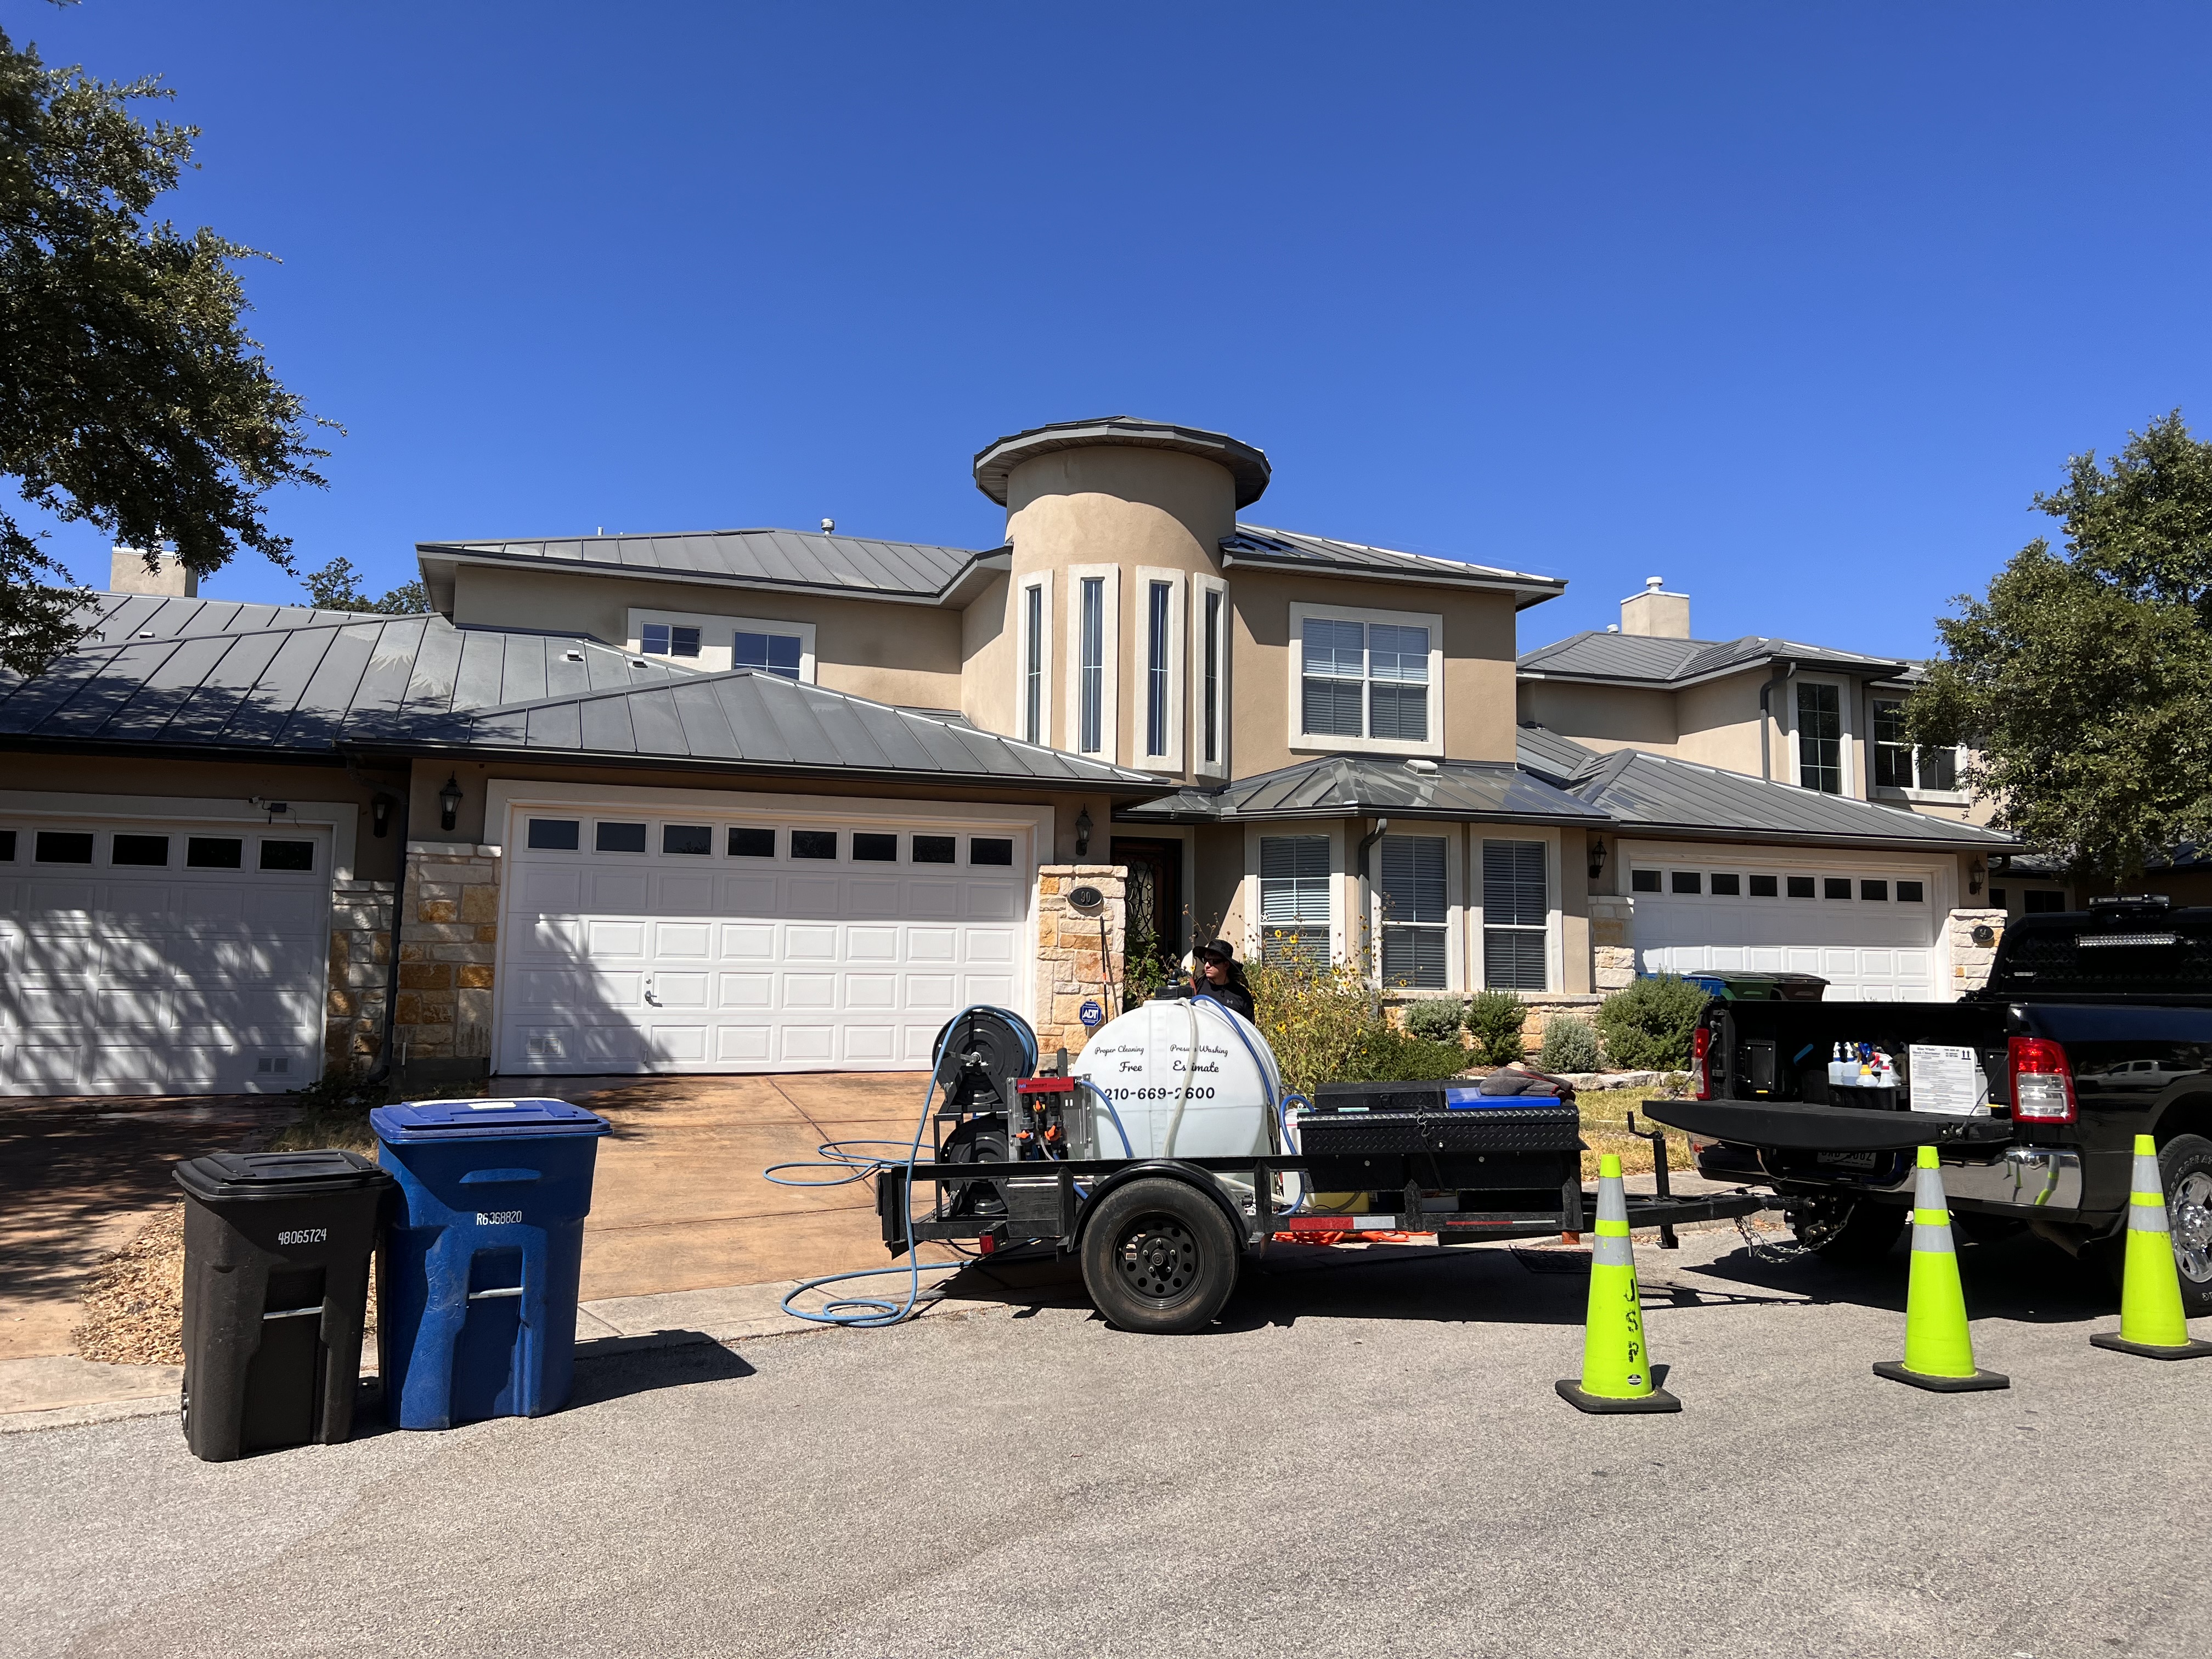 House Washing and Patio Cleaning in San Antonio, TX